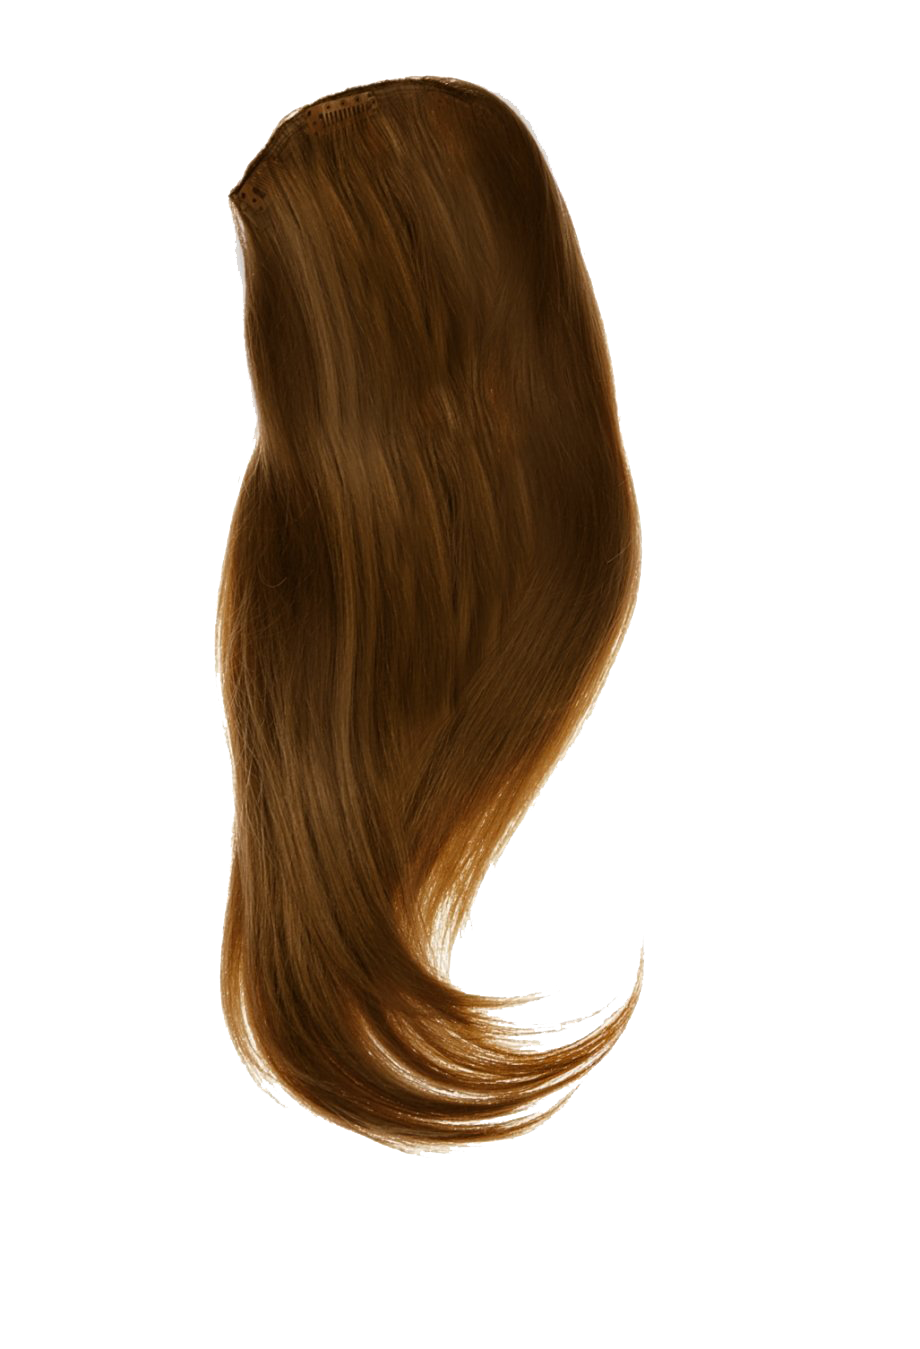 Women Hair PNG Transparent Images - PNG All